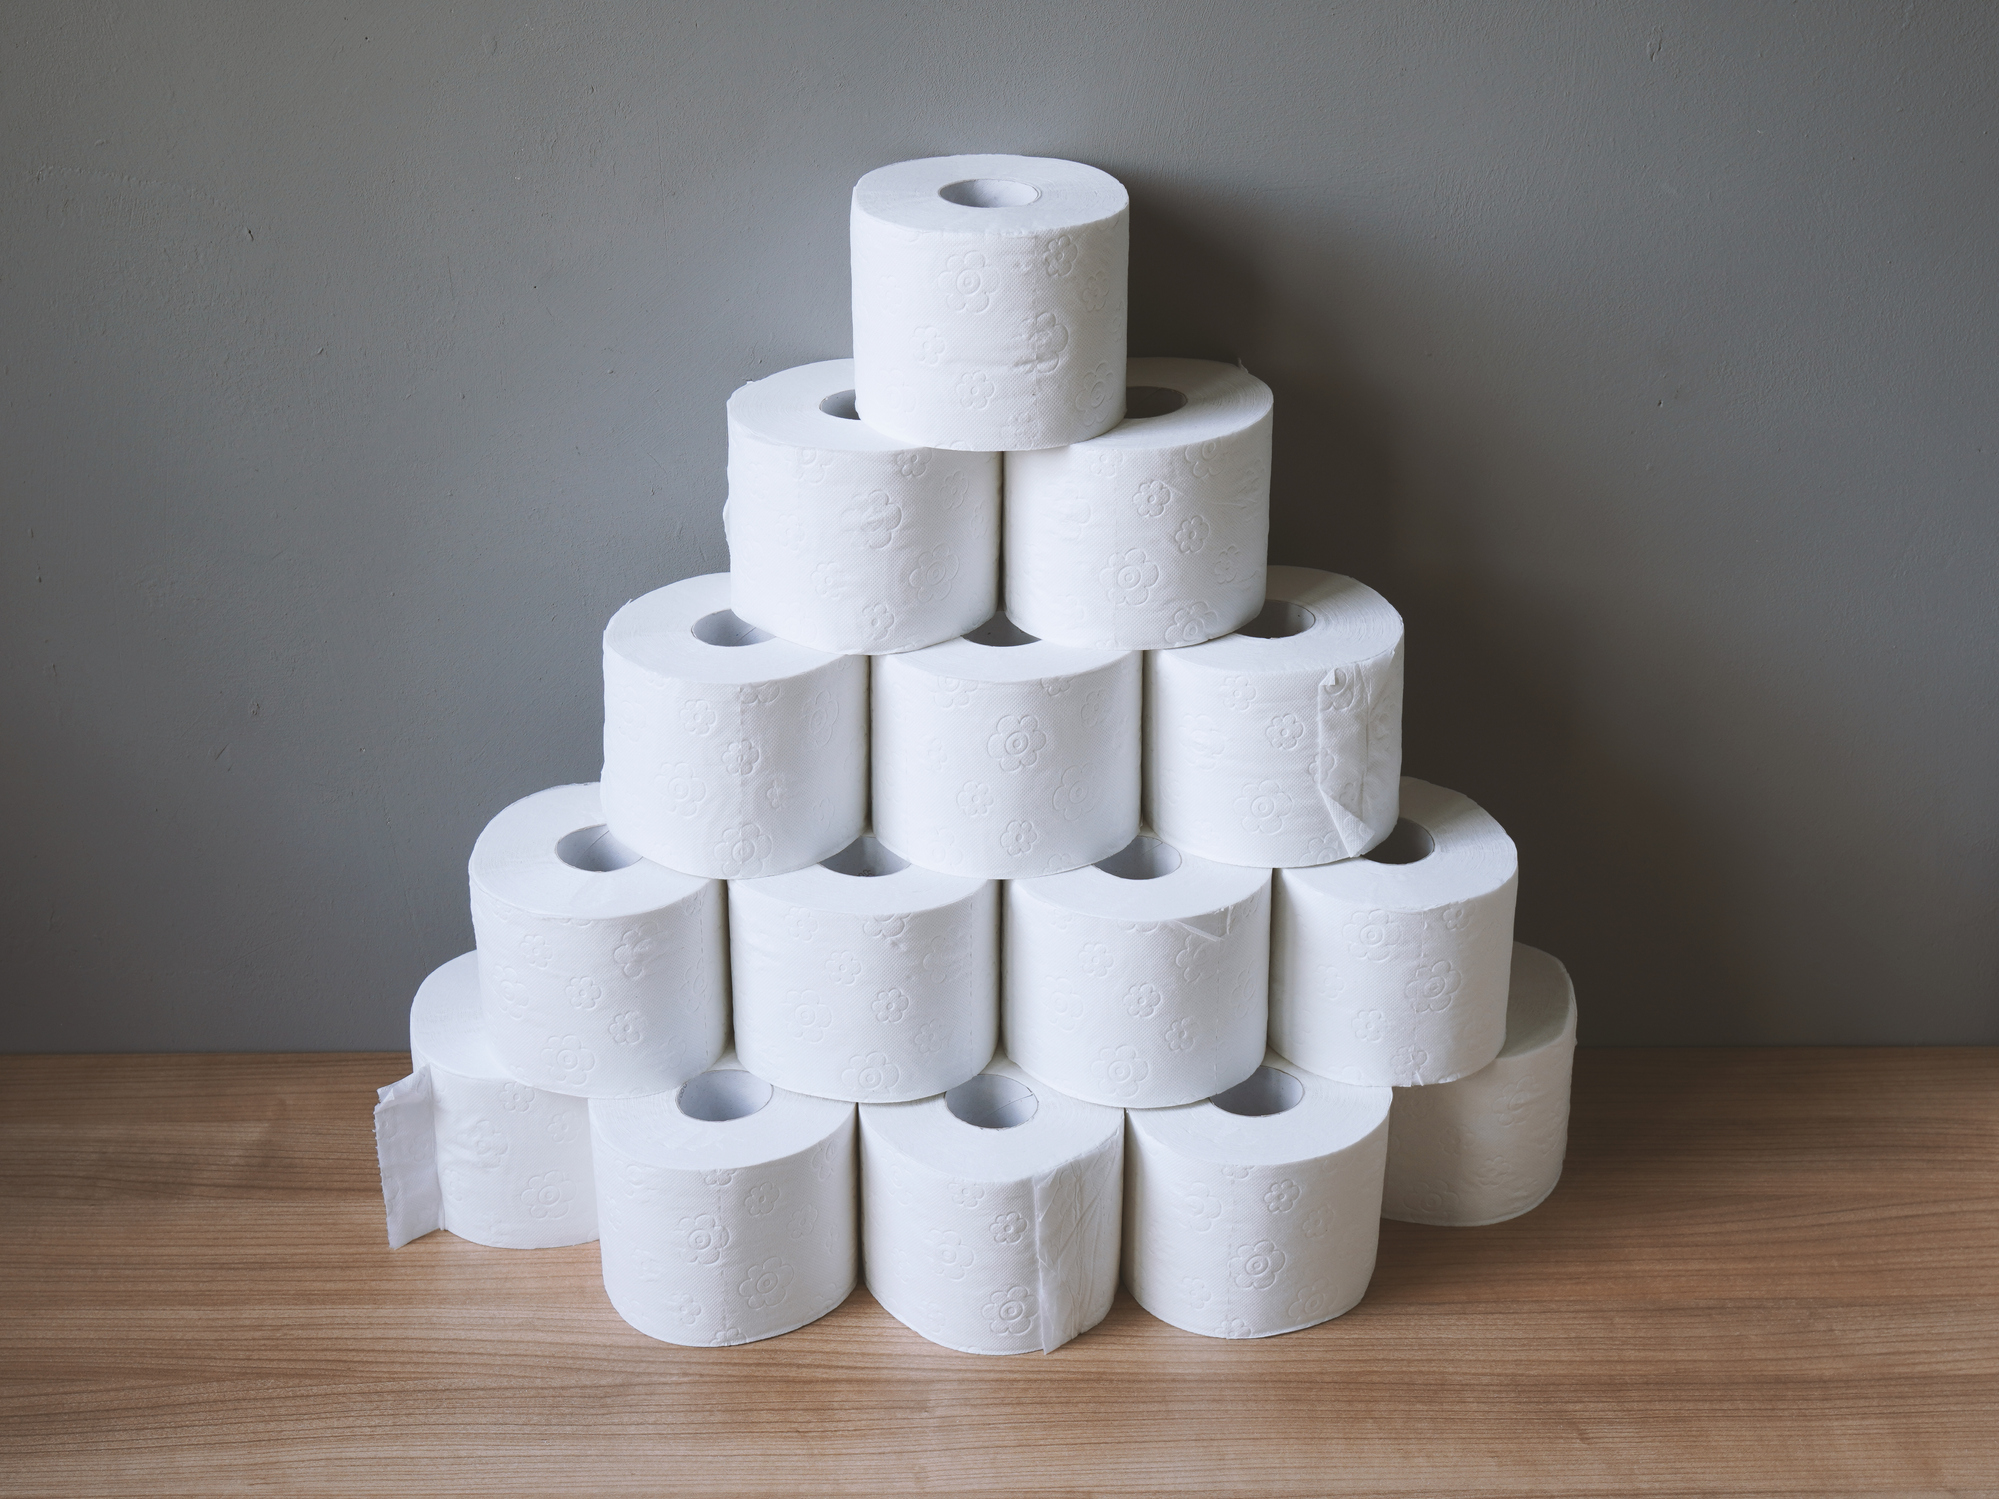 A pyramid made up of rolls of toilet paper on a wooden tabletop. 